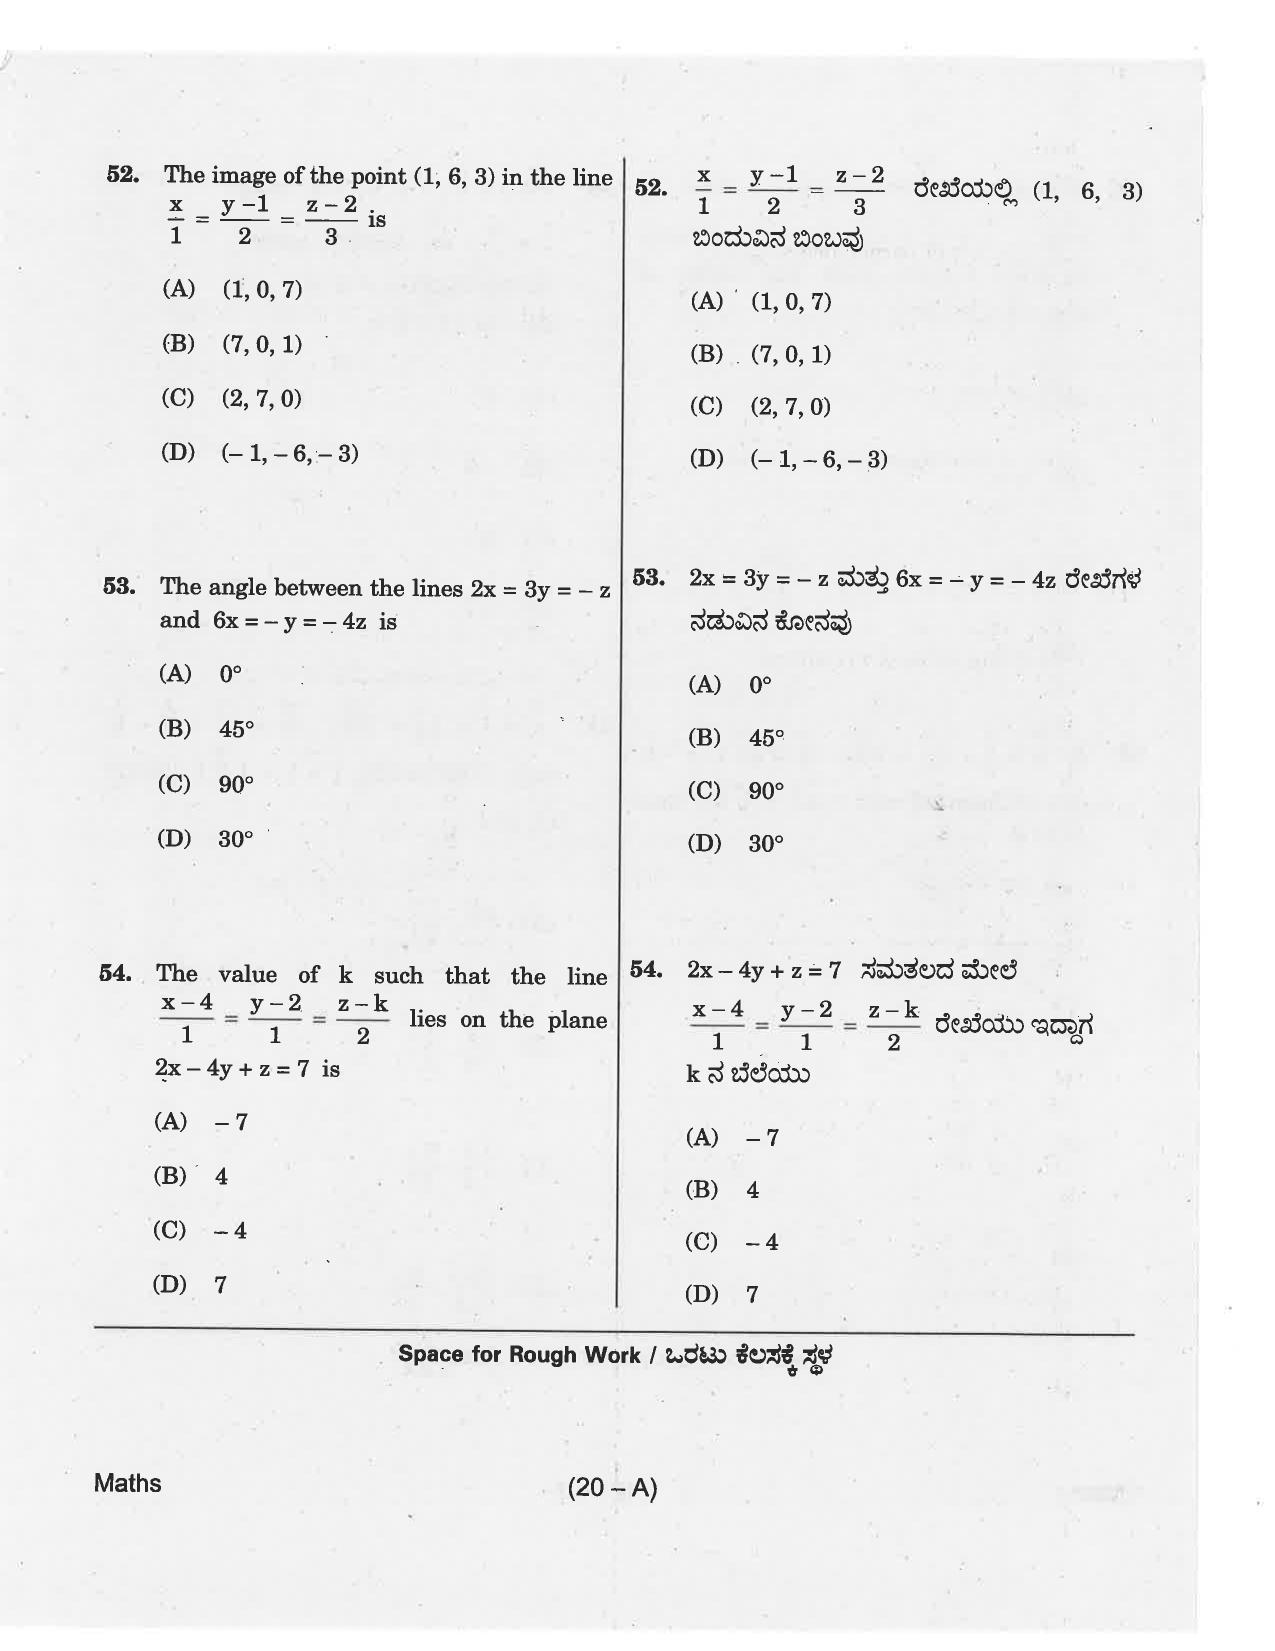 KCET Mathematics 2018 Question Papers - Page 20